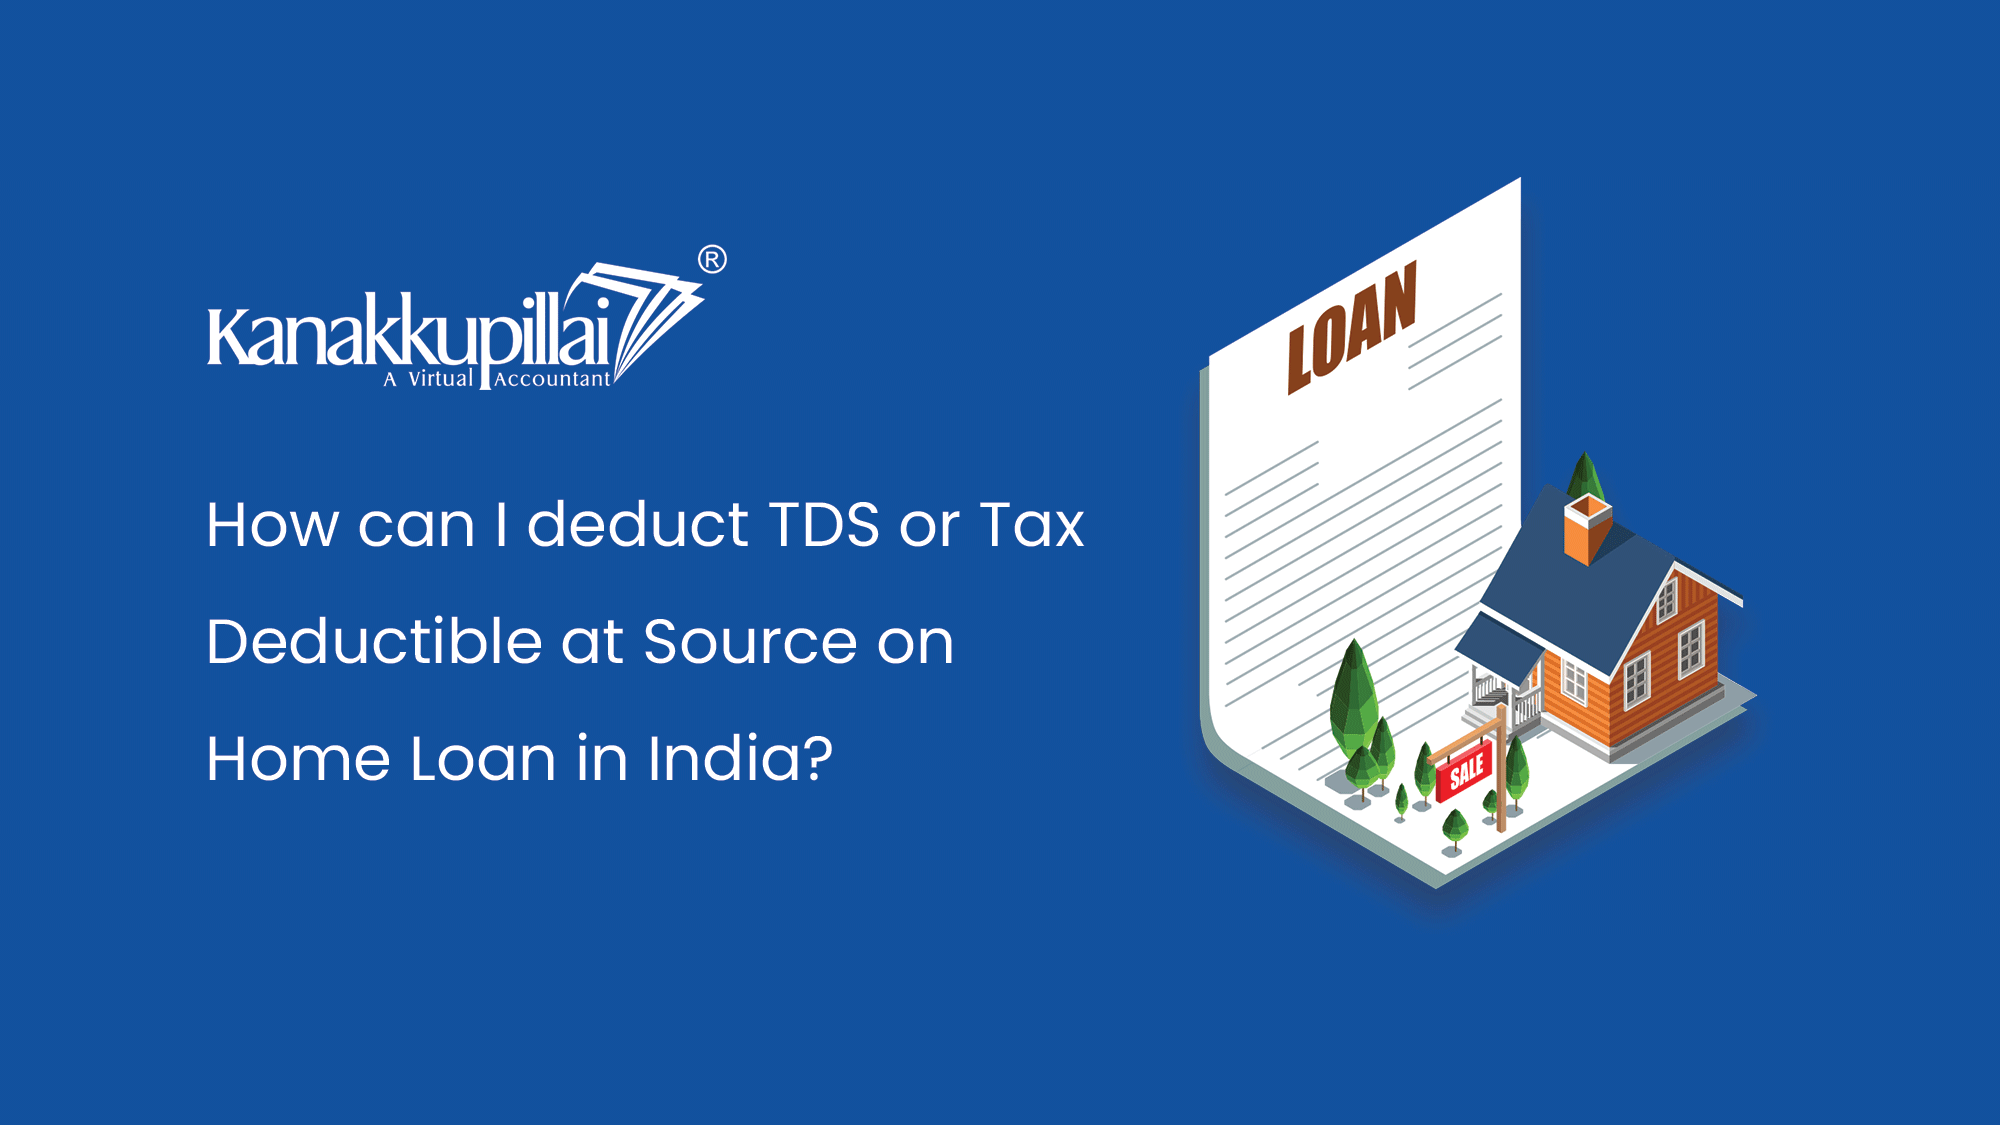 How can I deduct TDS or Tax Deductible at Source on Home Loan in India?